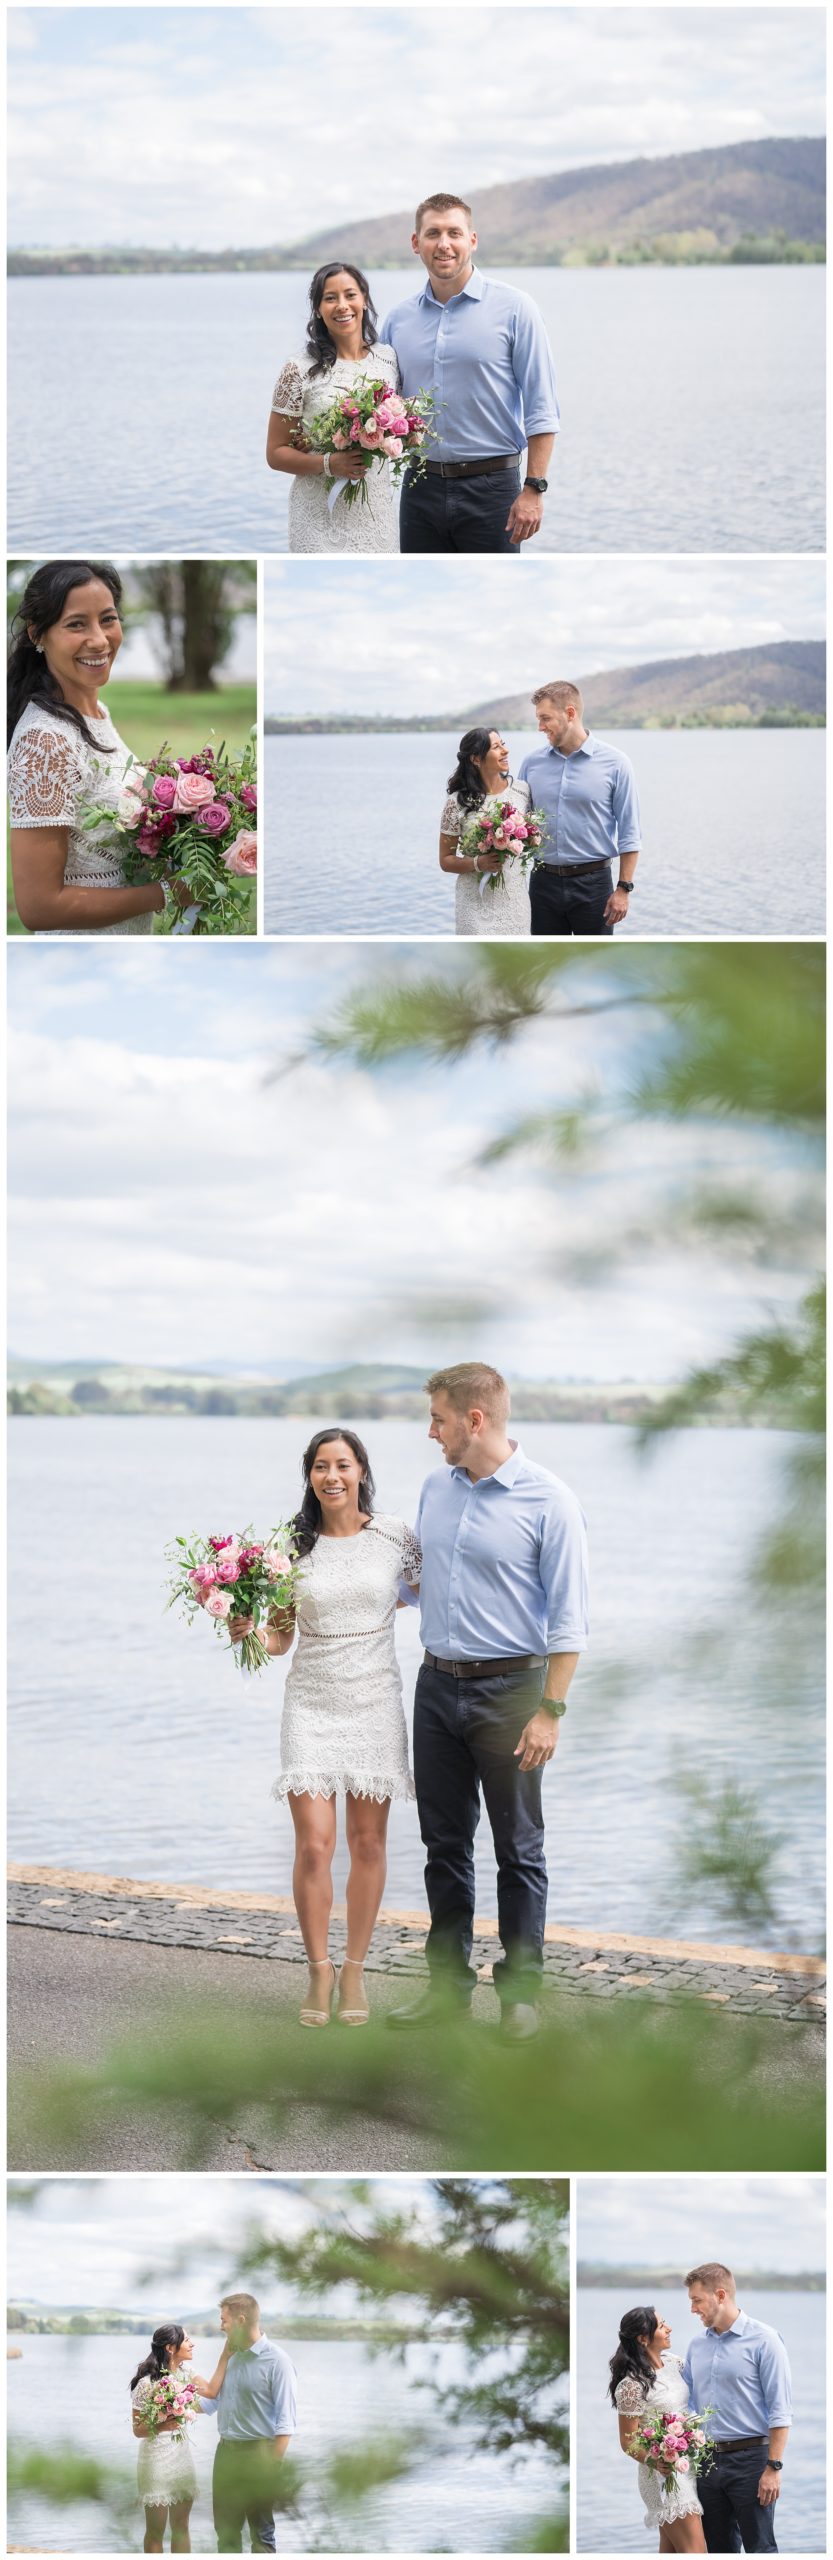 Couple getting married at  Lake Burley Griffin  | Wedding photographer